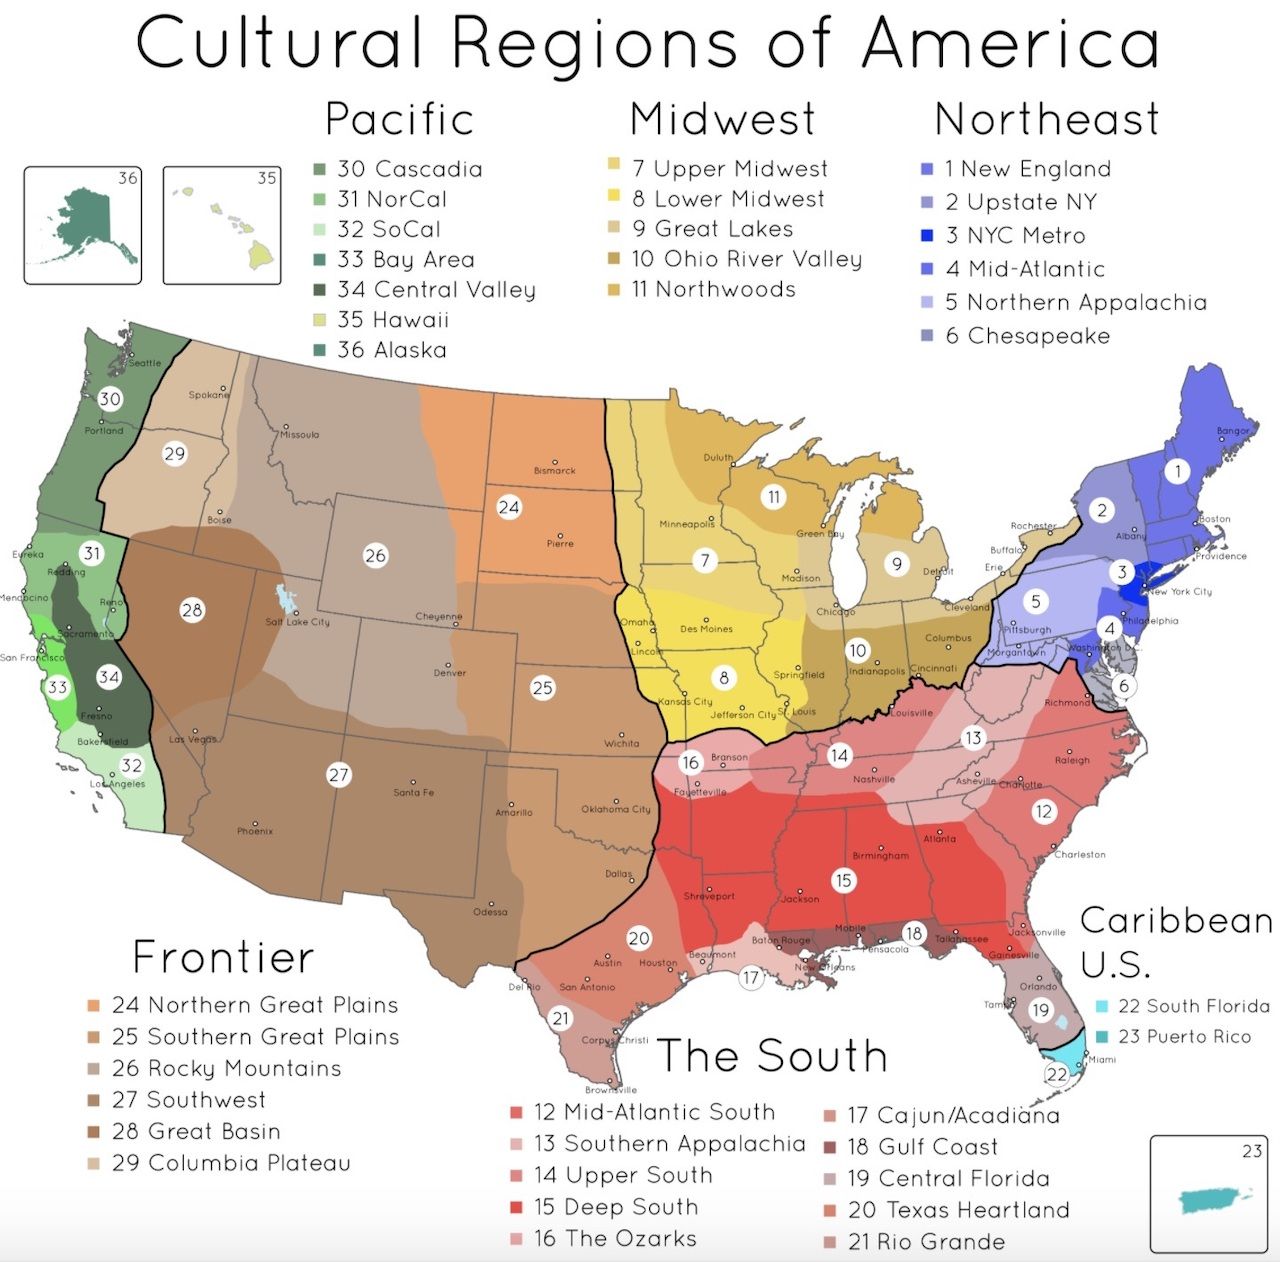 cultural regions of the United States, mapped